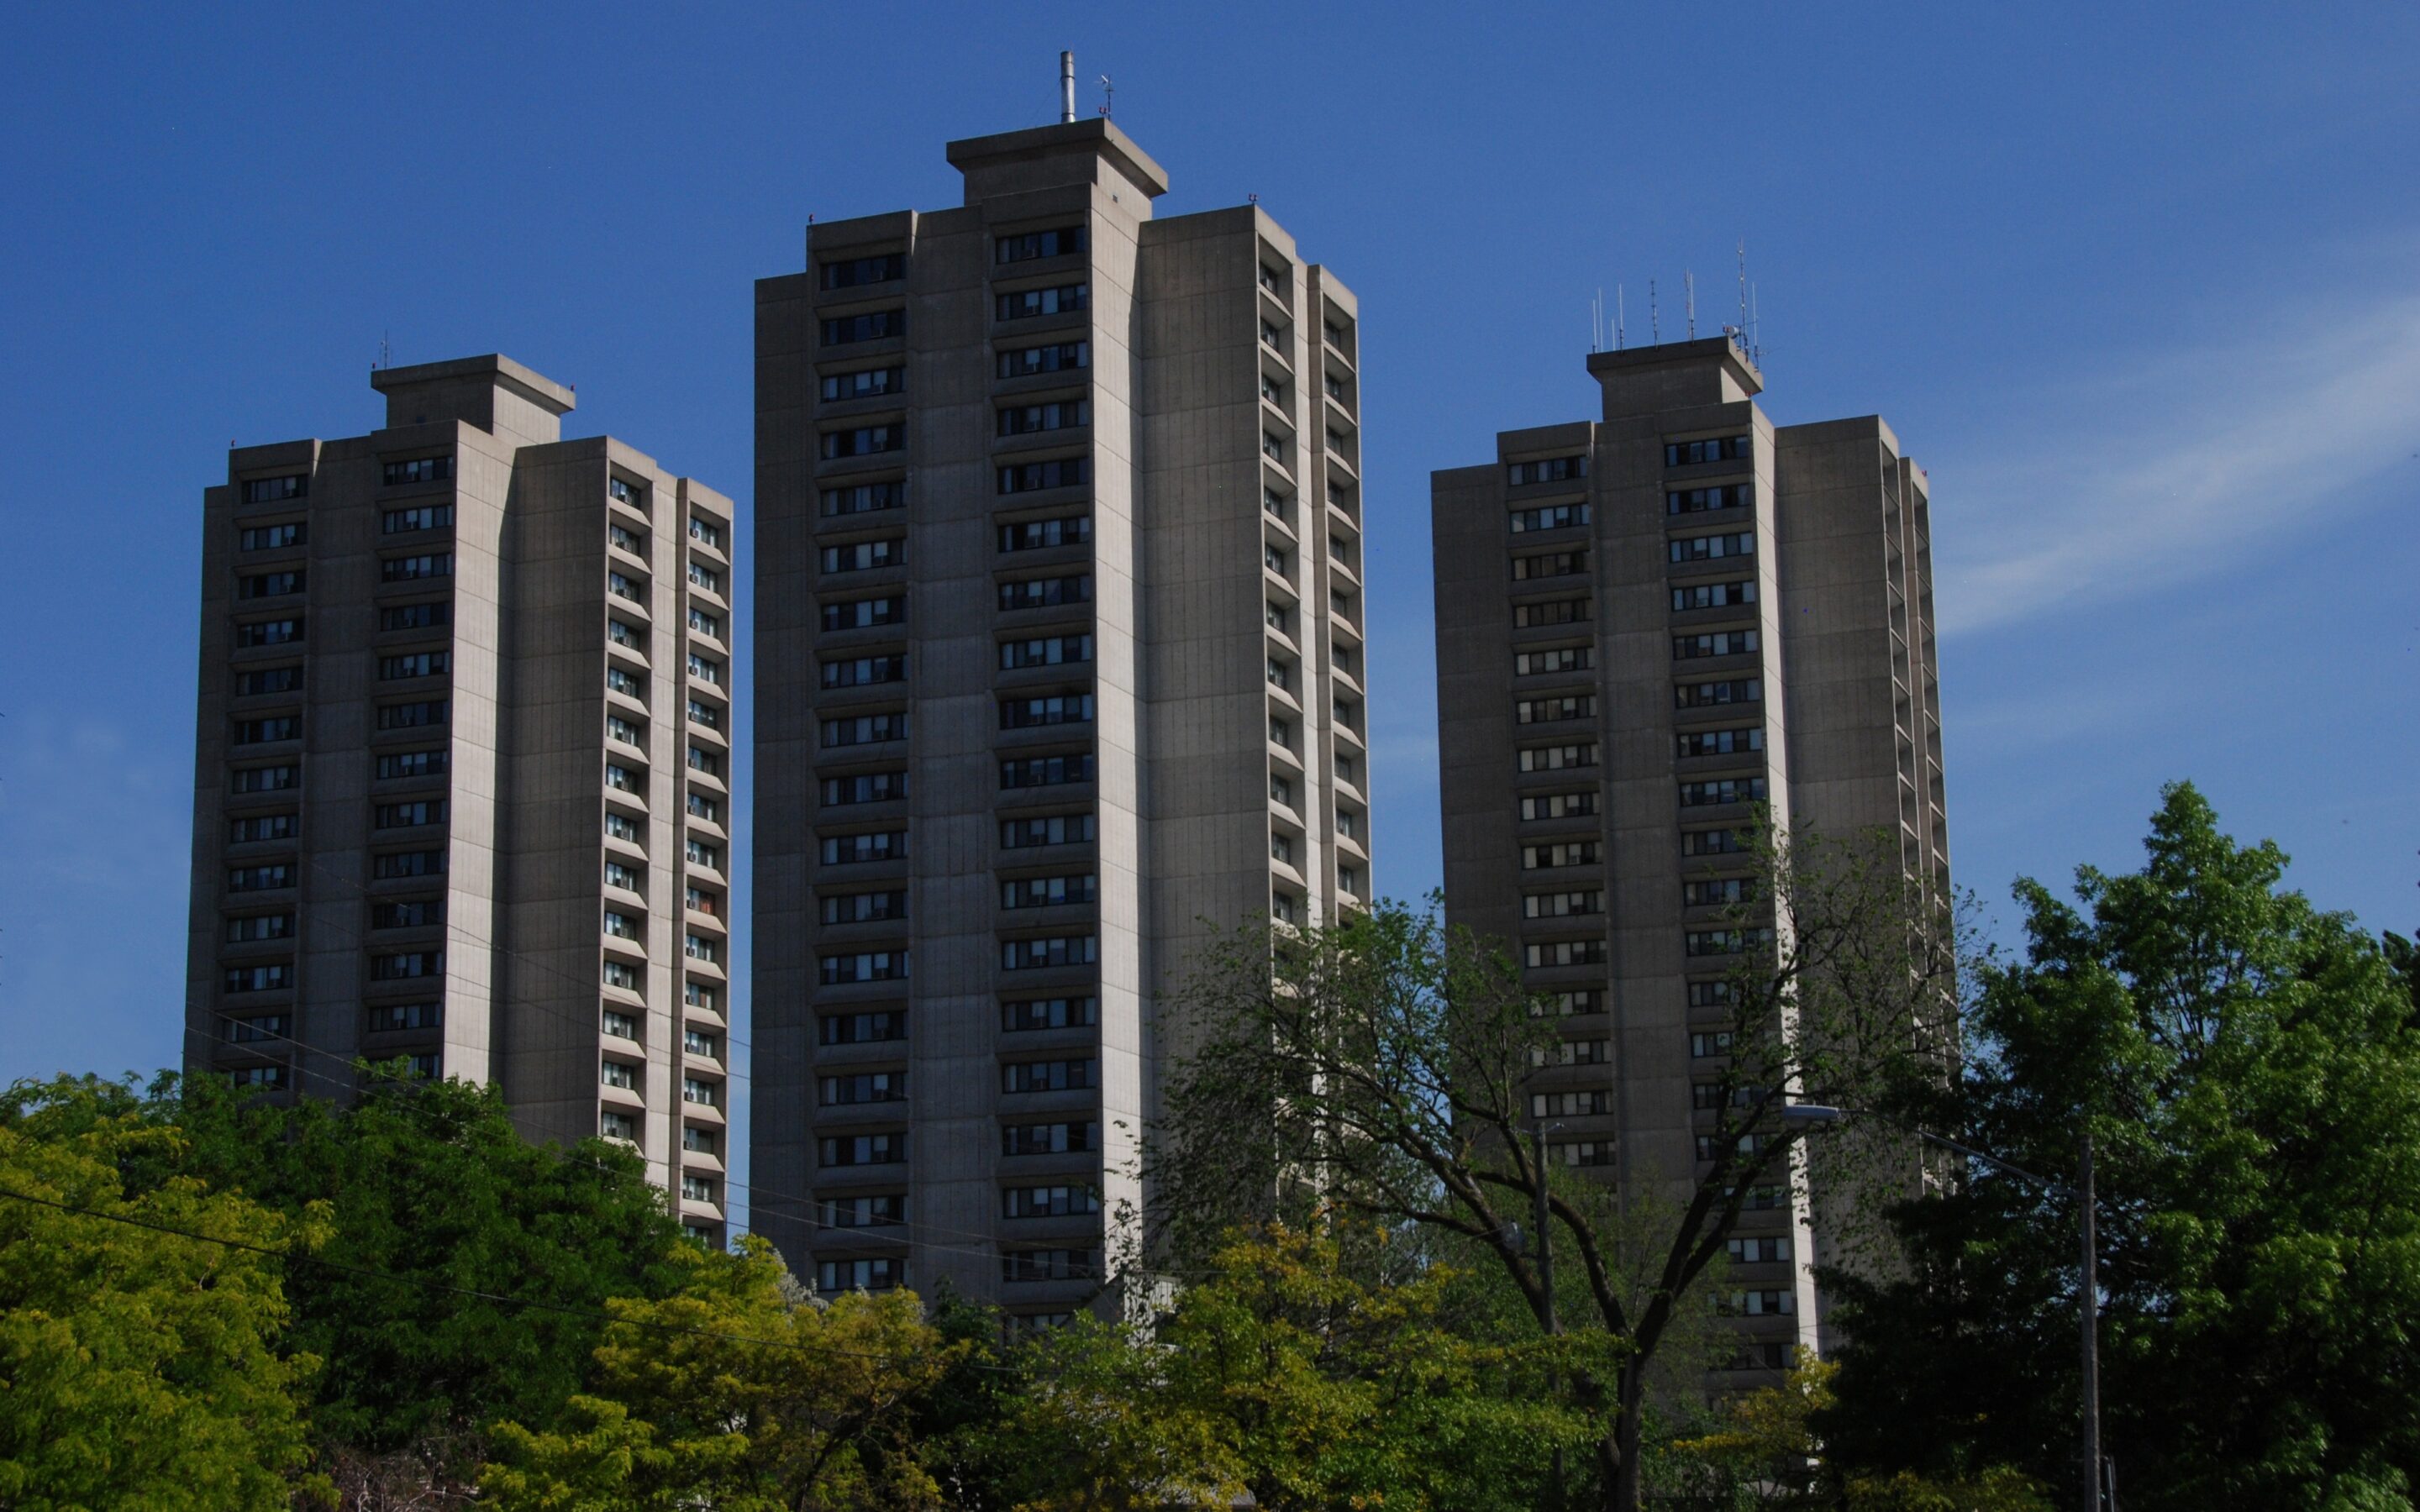 Charles Horn Towers